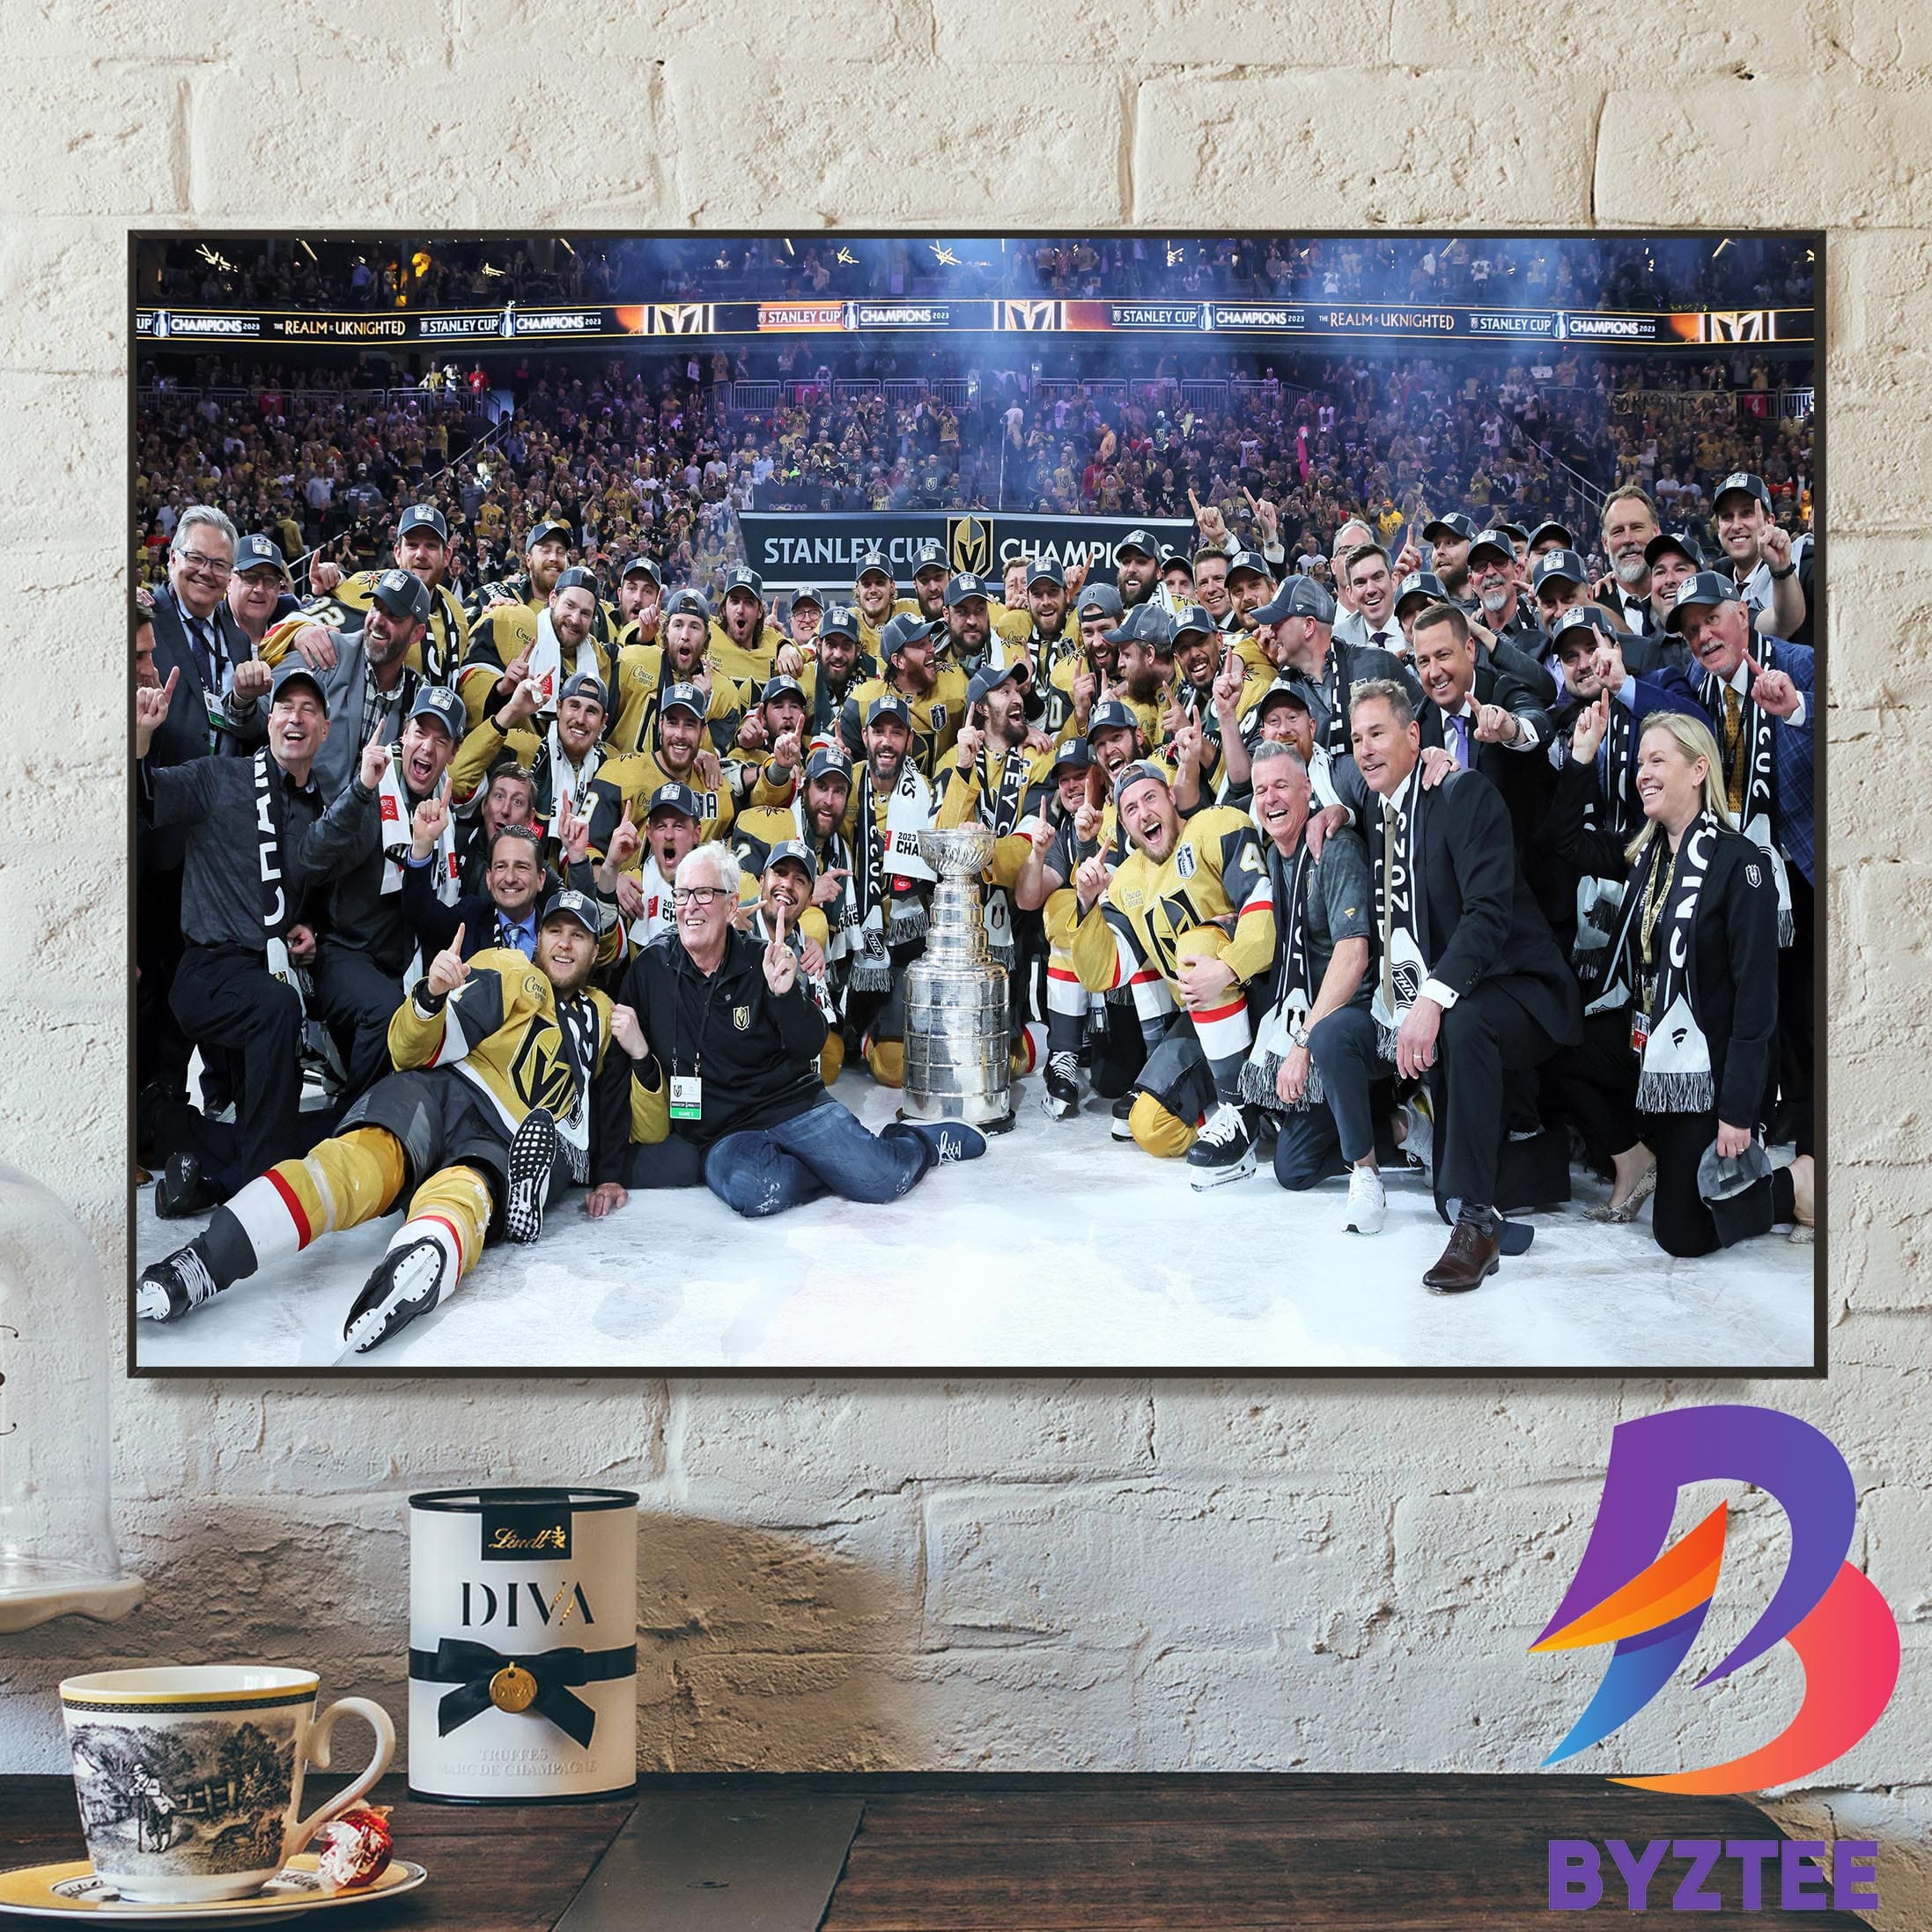 http://byztee.com/wp-content/uploads/2023/06/Congrats-Vegas-Golden-Knights-Are-Team-Of-Champions-Stanley-Cup-Champions-2023-Home-Decor-Poster-Canvas.jpg